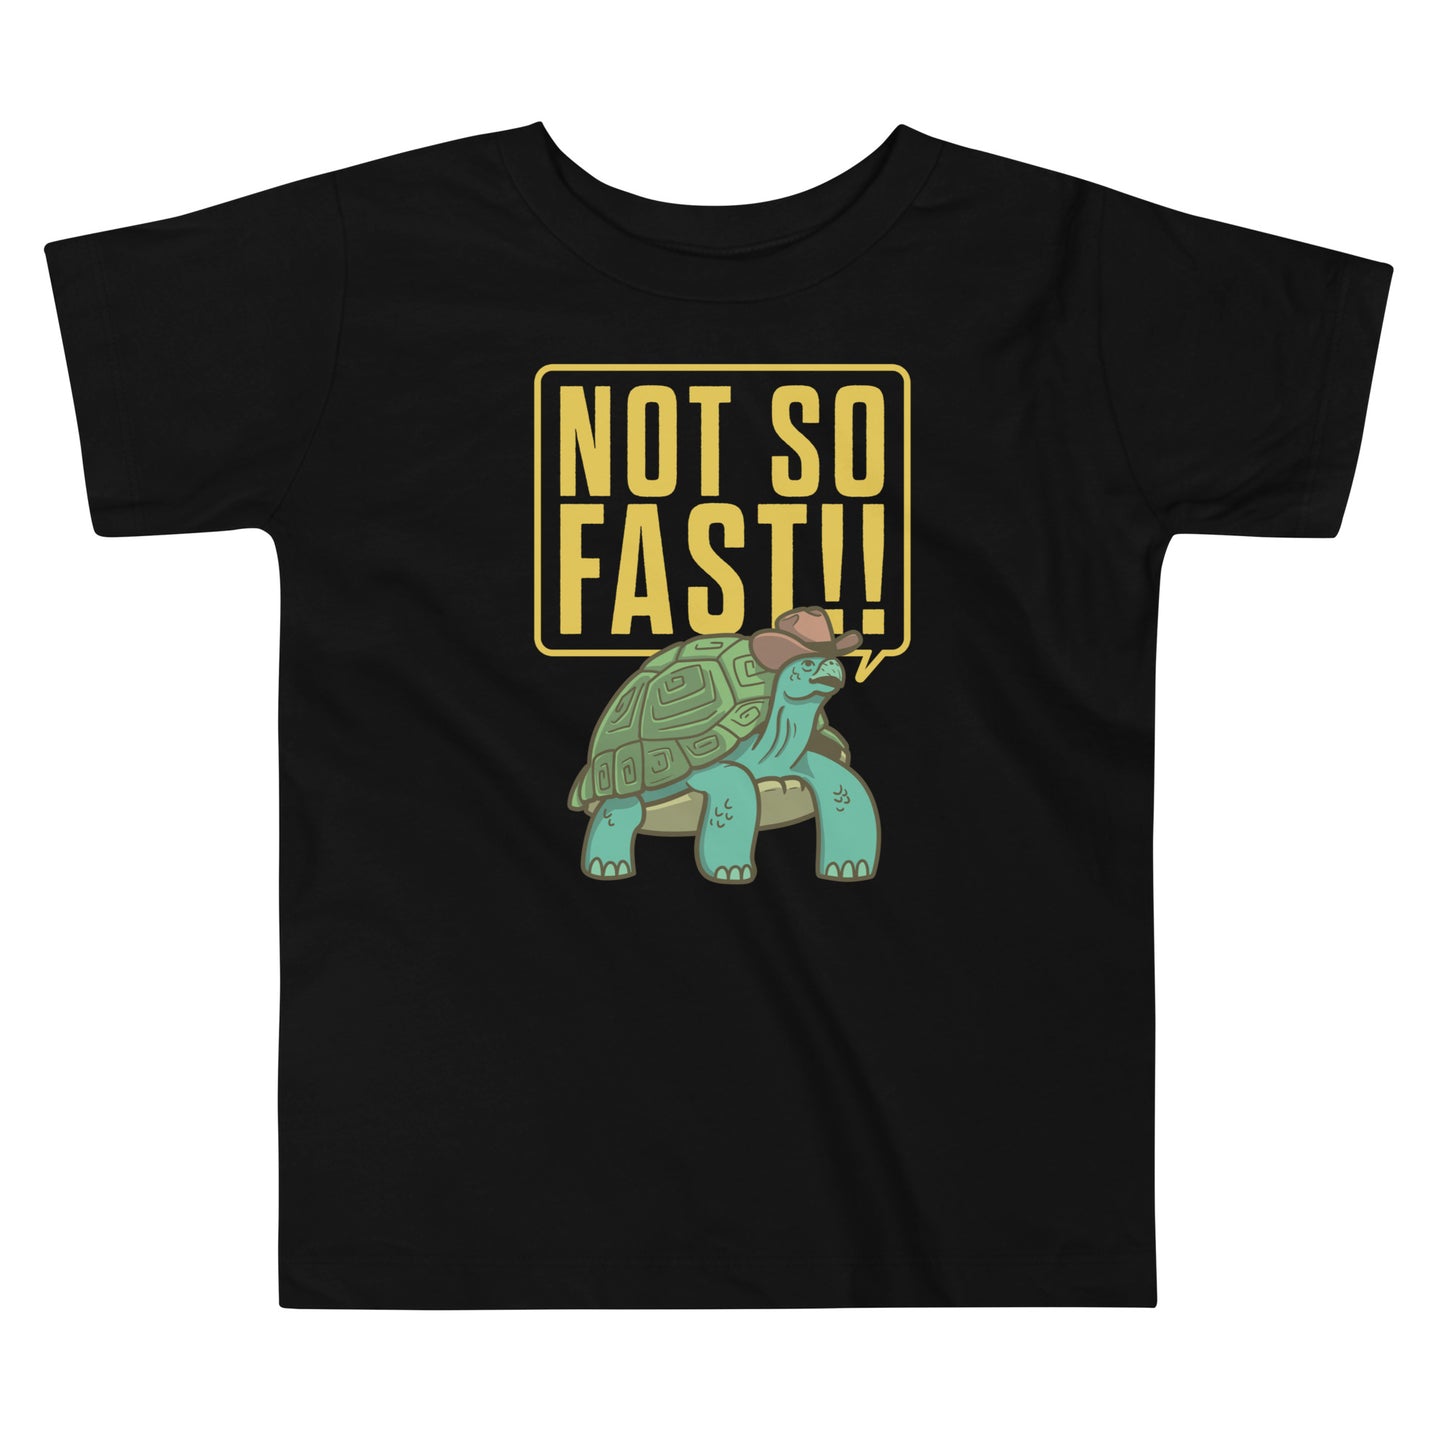 Not So Fast!! Kid's Toddler Tee